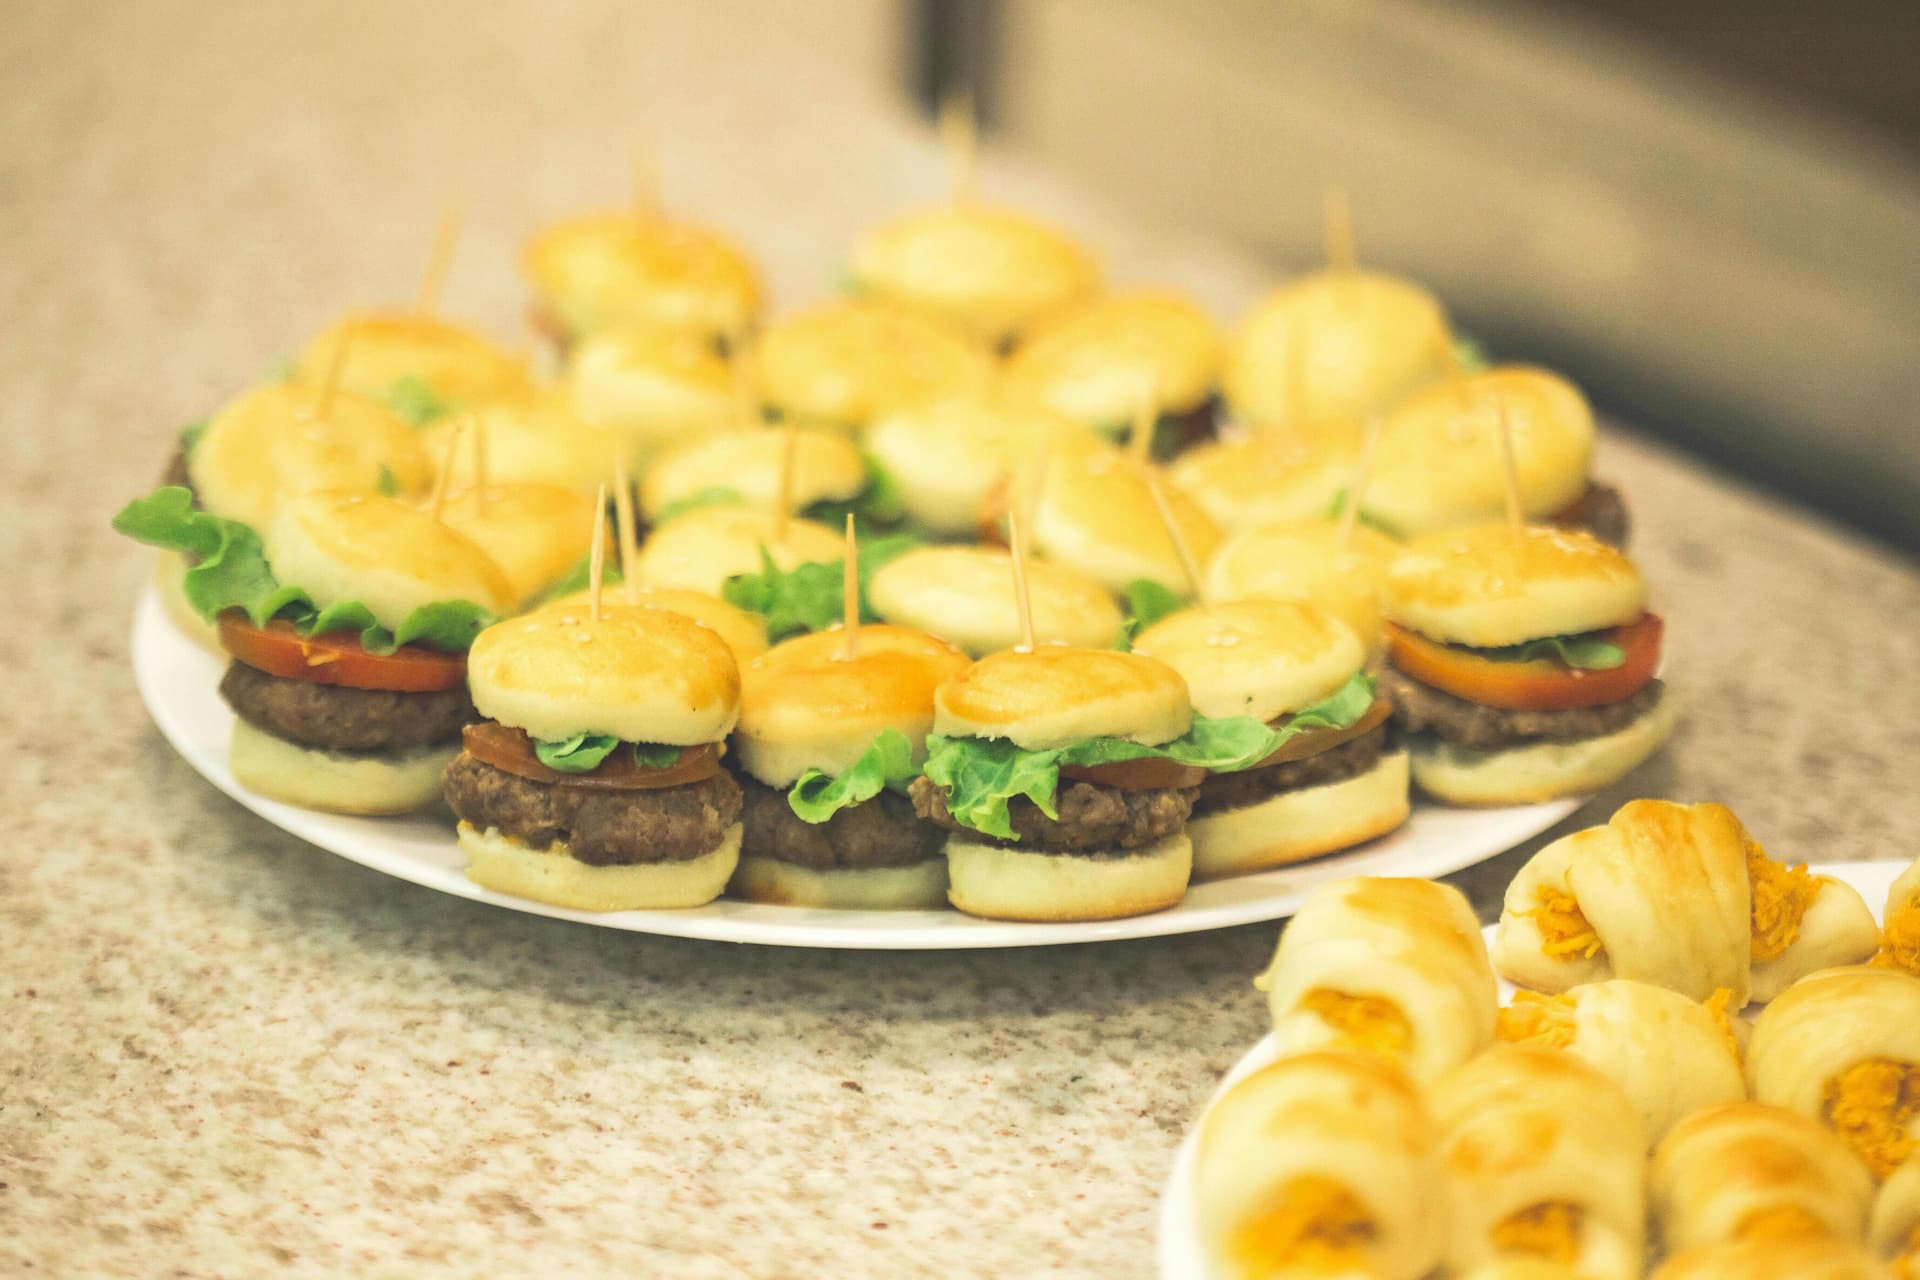 Finger Food Fun: Gourmet Sliders and Craft Cocktails That Sync in Perfect Harmony